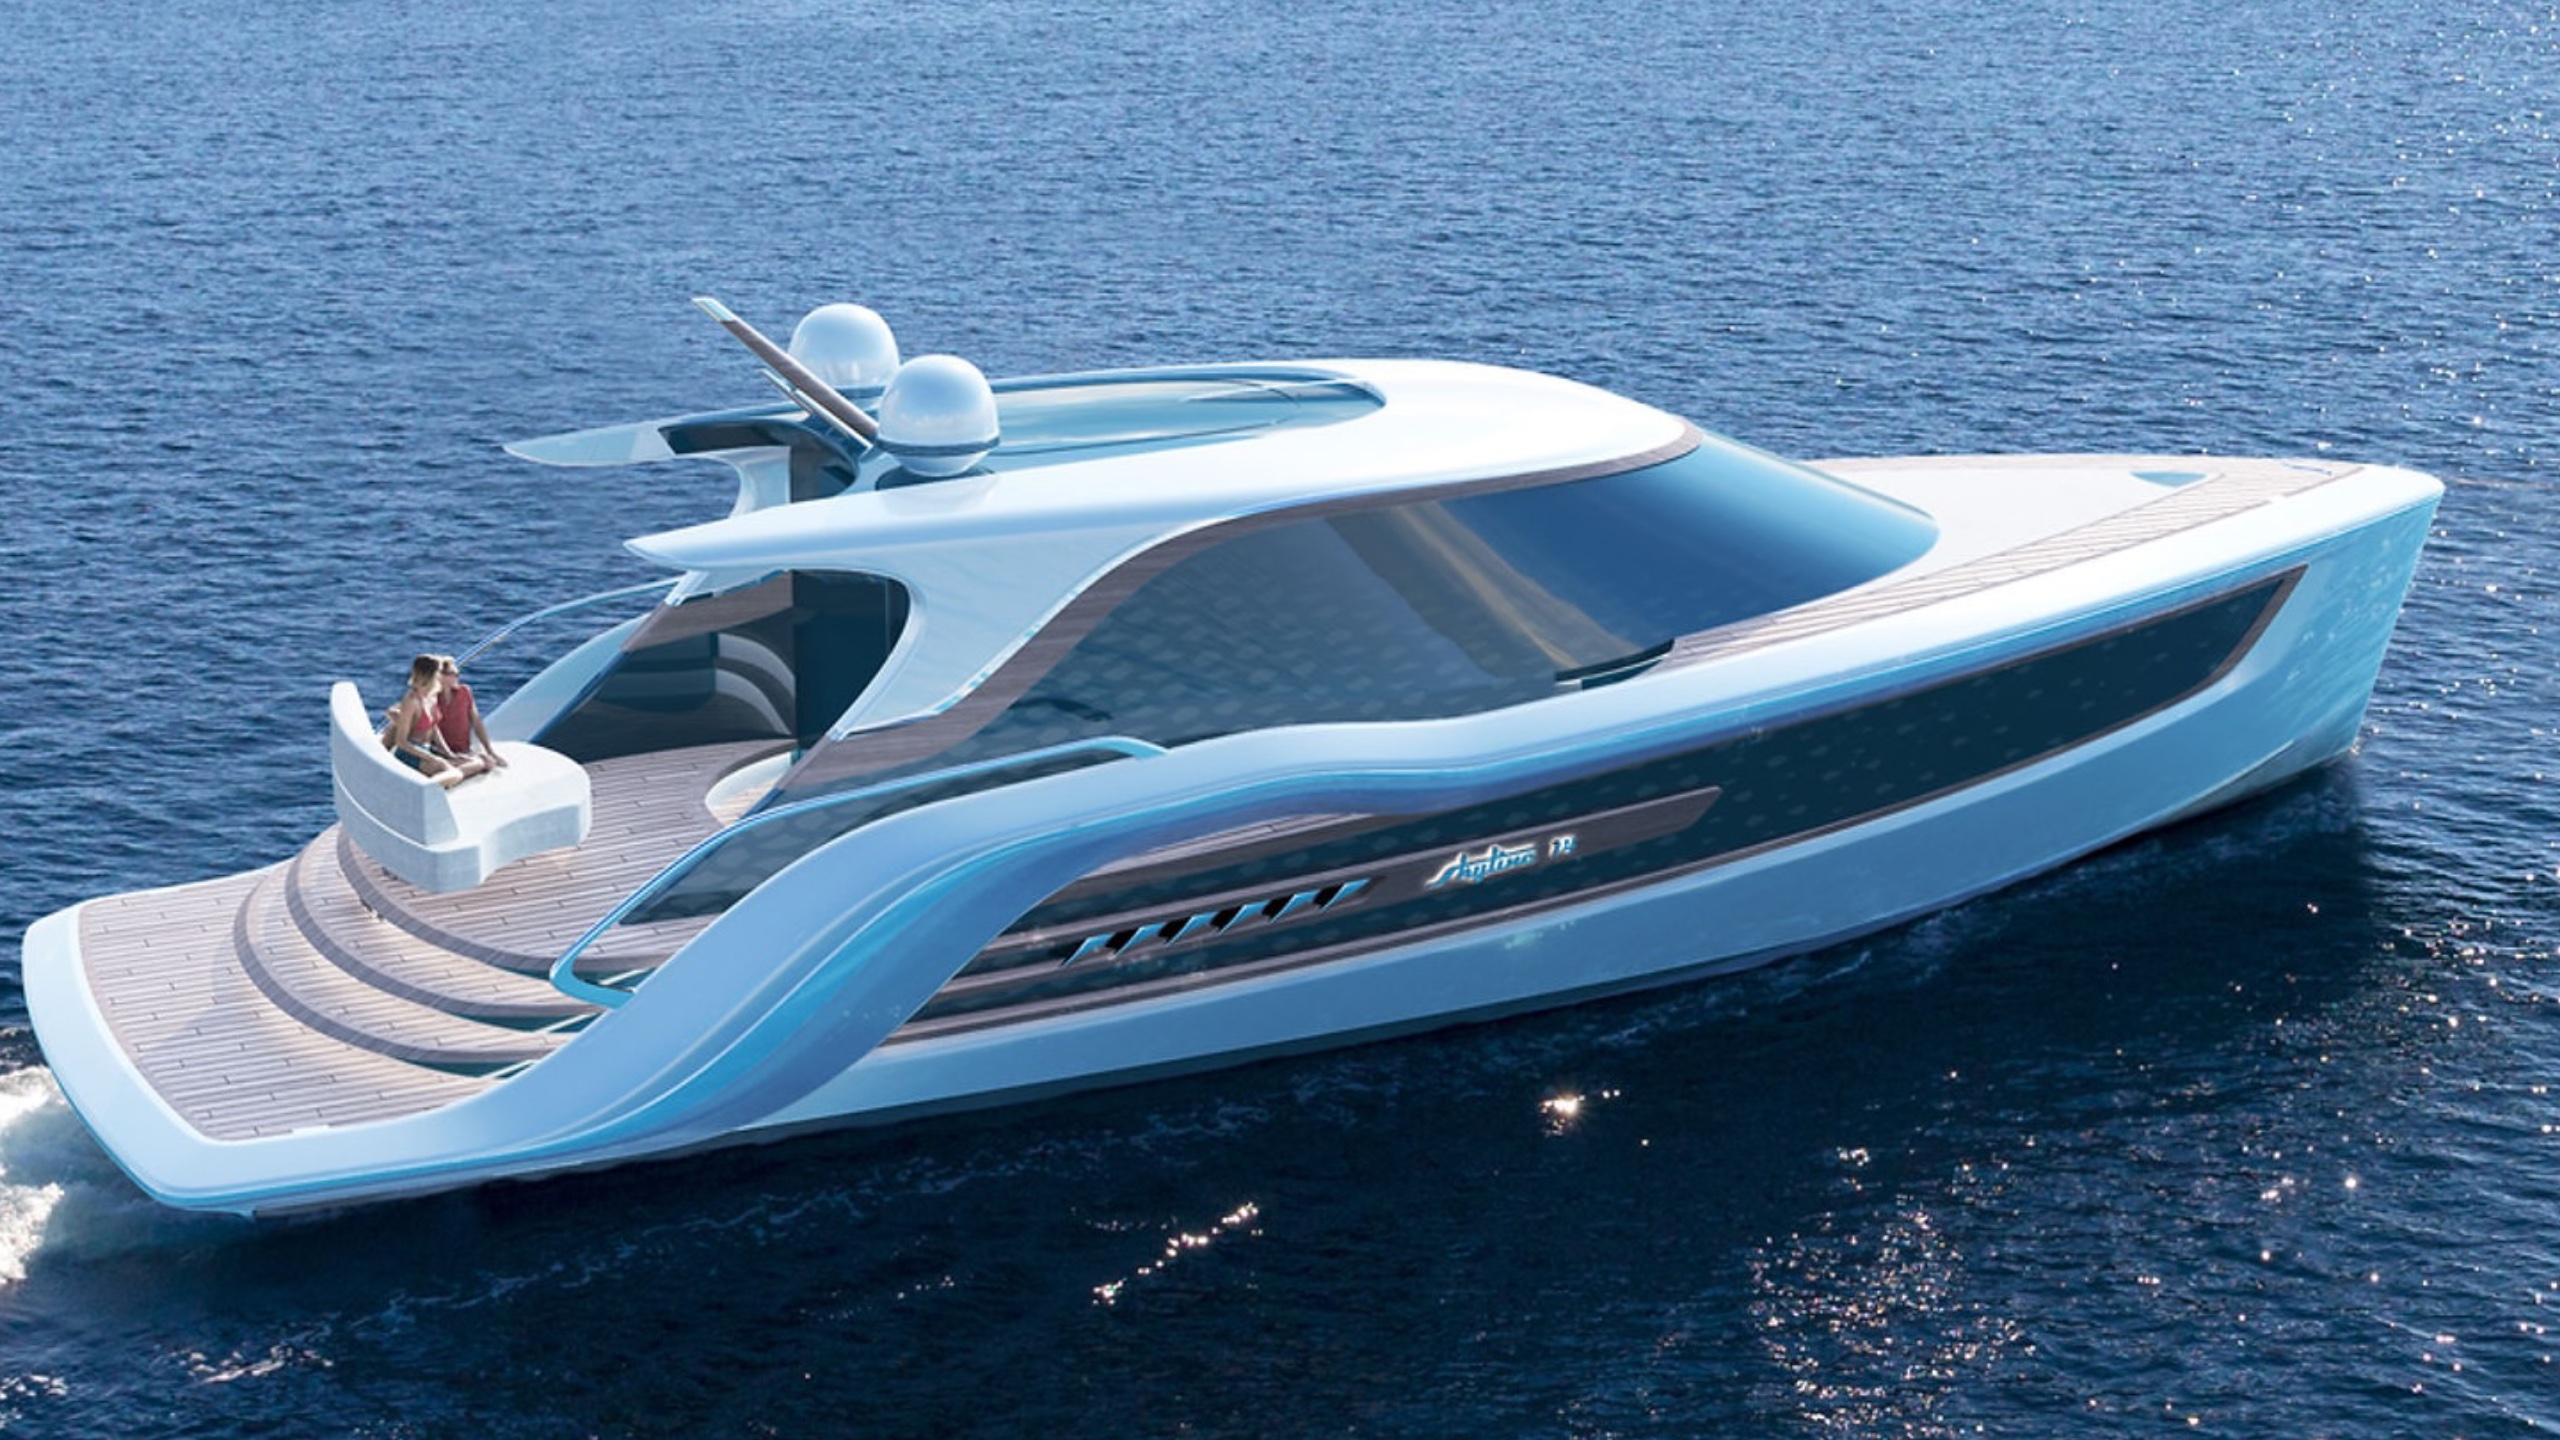 Andy Waugh's Skyline 14 Superyacht Concept Aims at the Metaverse